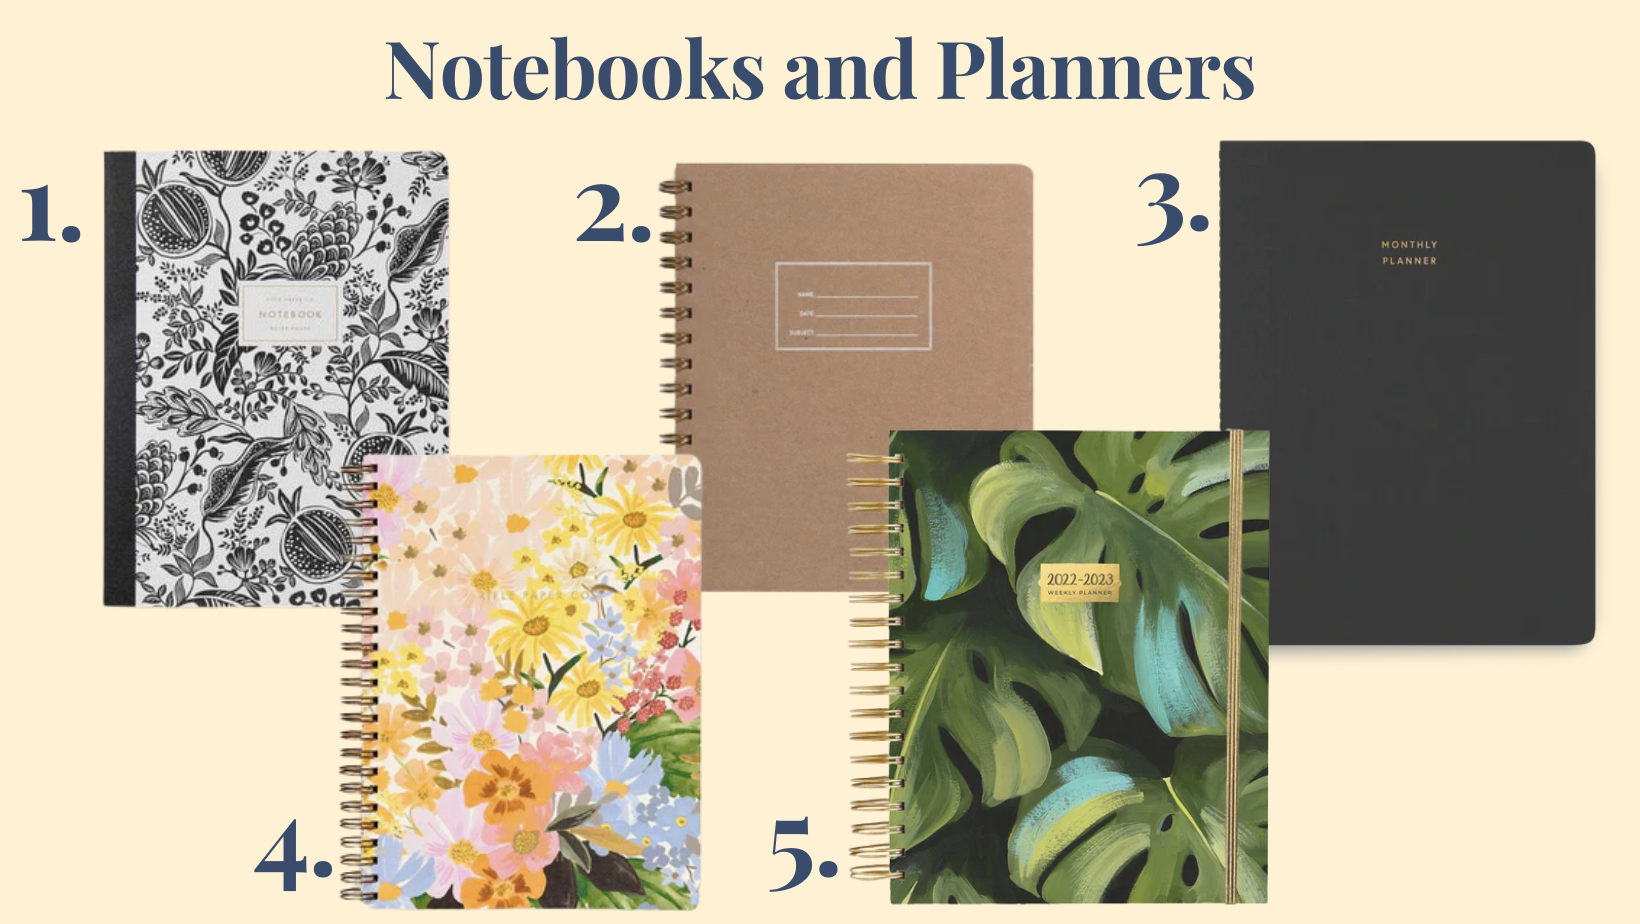 Text reads "Notebooks and Planners." There are three notebooks and two planners on the page. They are: 1. Pomegranate Ruled Notebook  2. Standard Notebook Lined - Right Handed  3. Appointed Large Monthly Planner - Charcoal Gray  4. Marguerite Spiral Notebook  5. Panama Planner: Academic Year